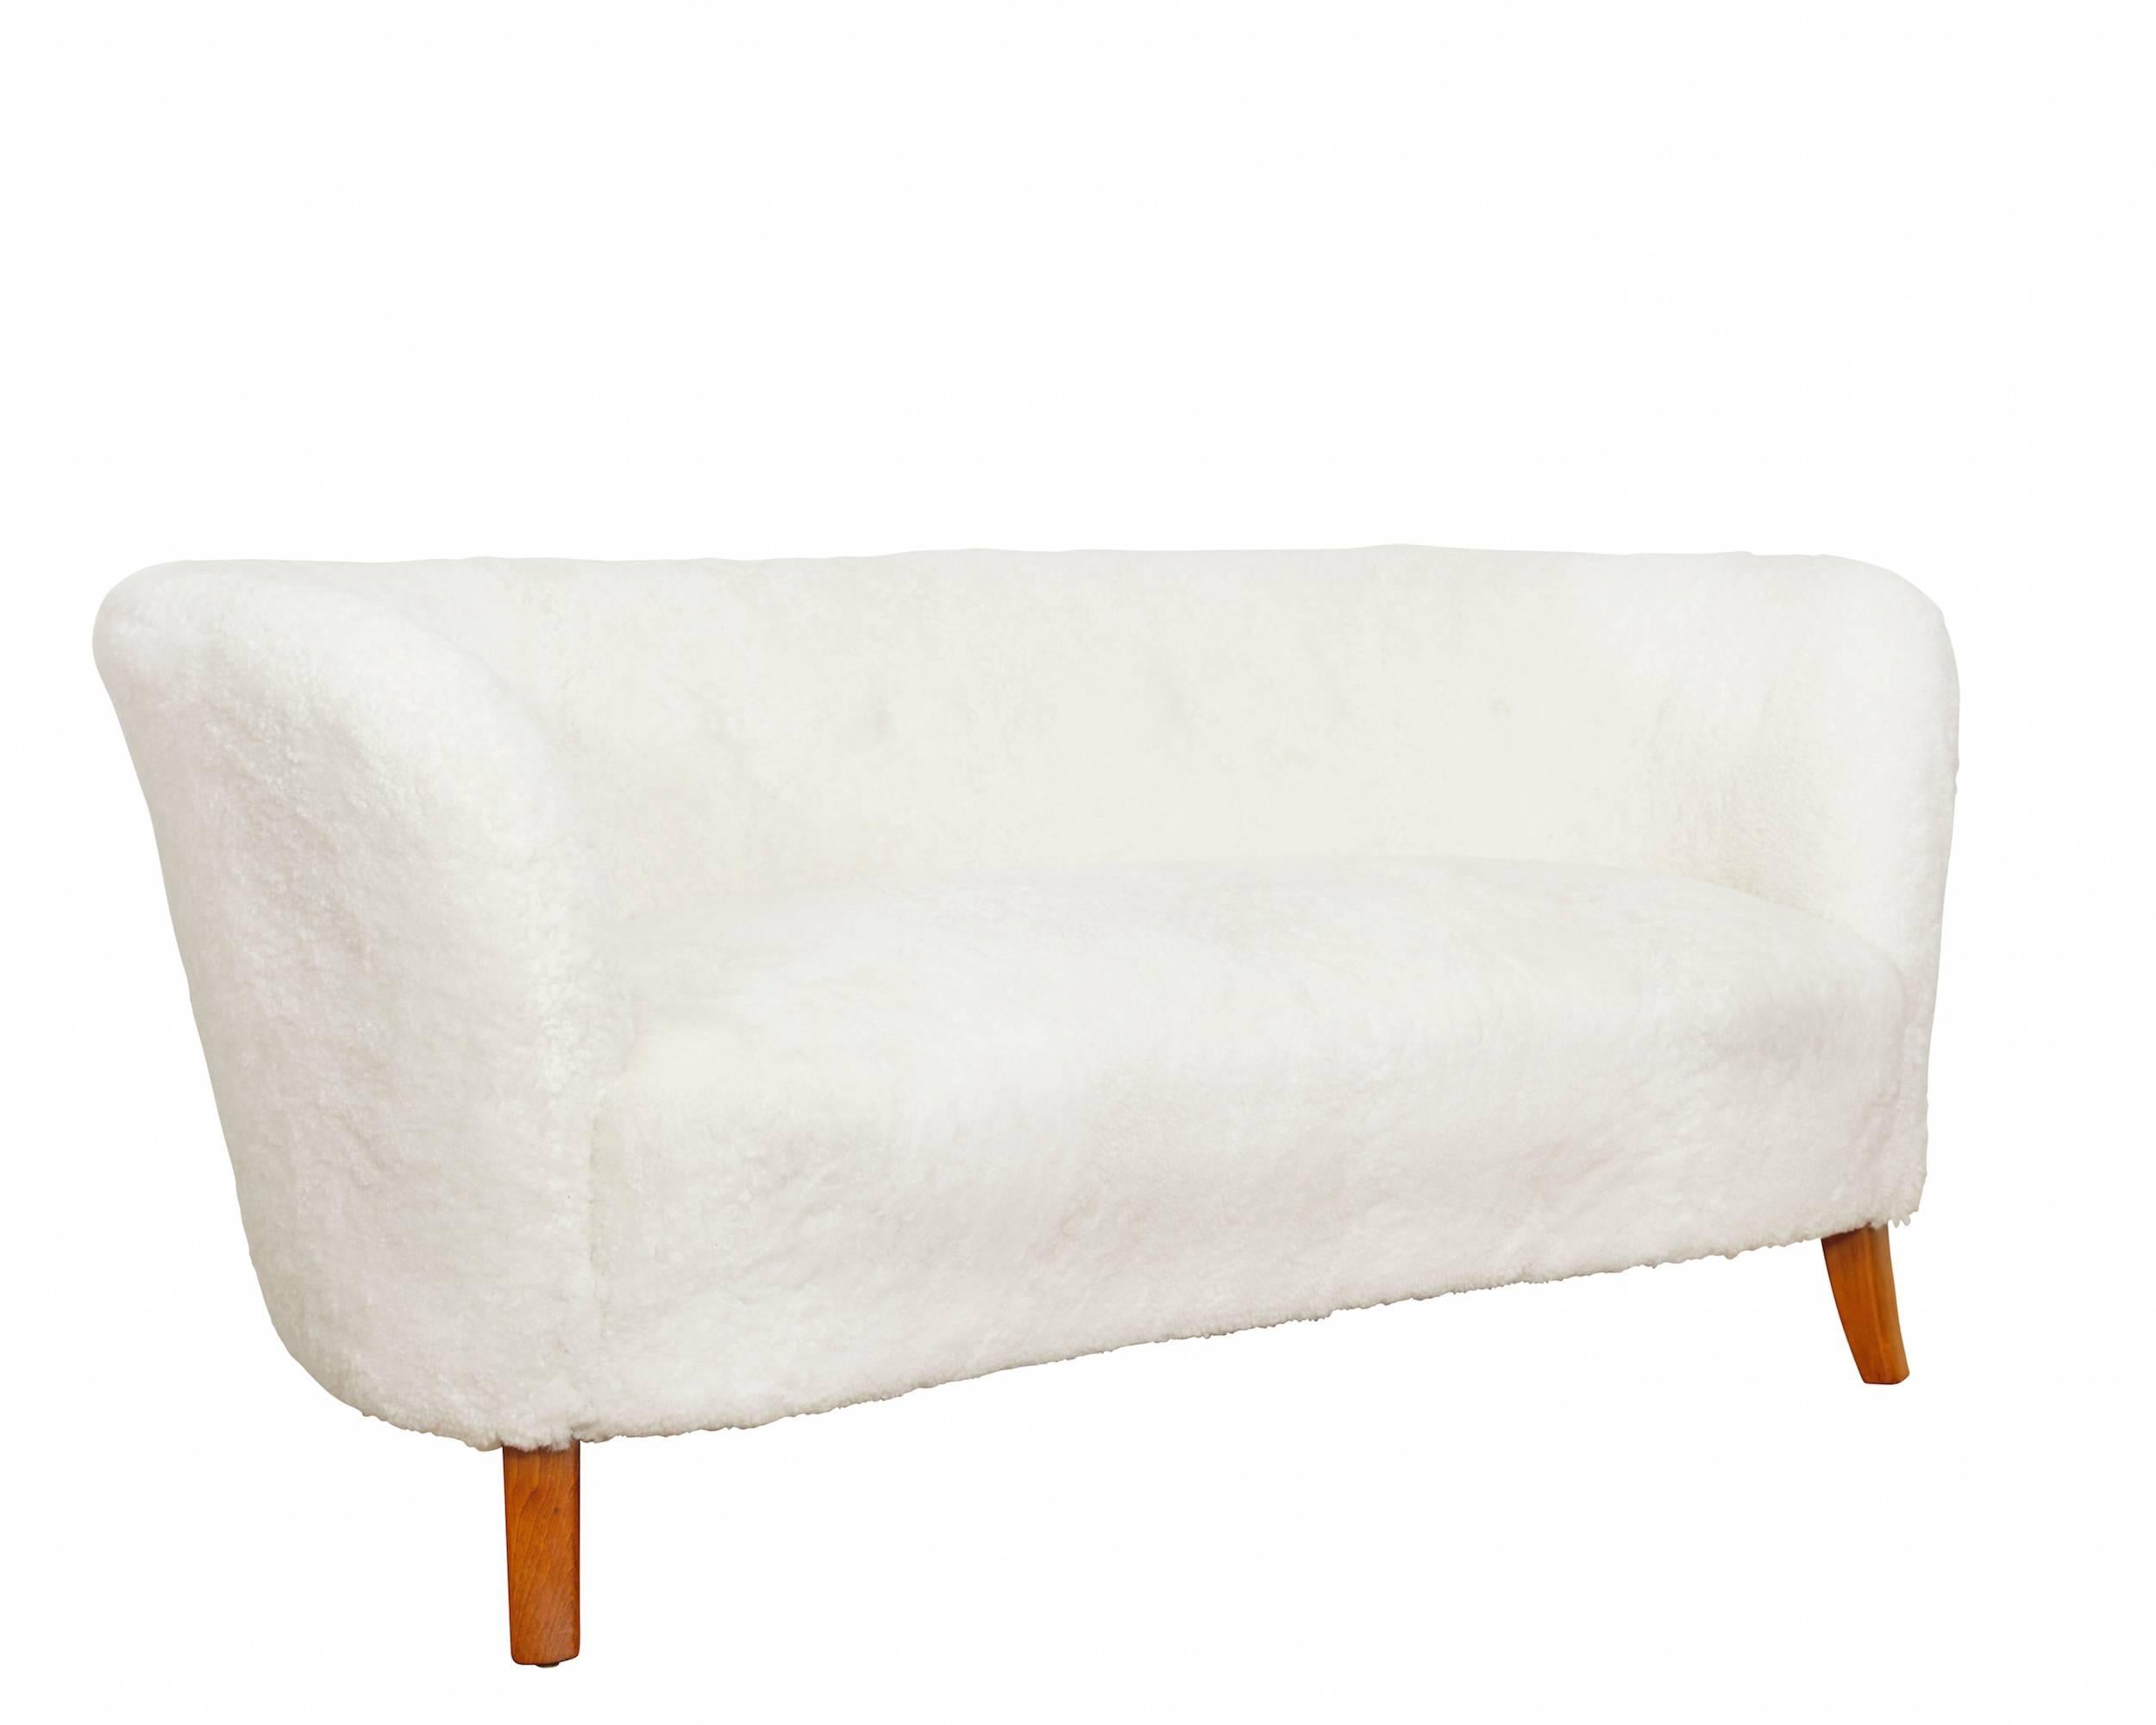 A three-seat curved sofa, upholstered in white sheepskin, raised on stained beech legs. 
Manufactured by Georg Kofoed.